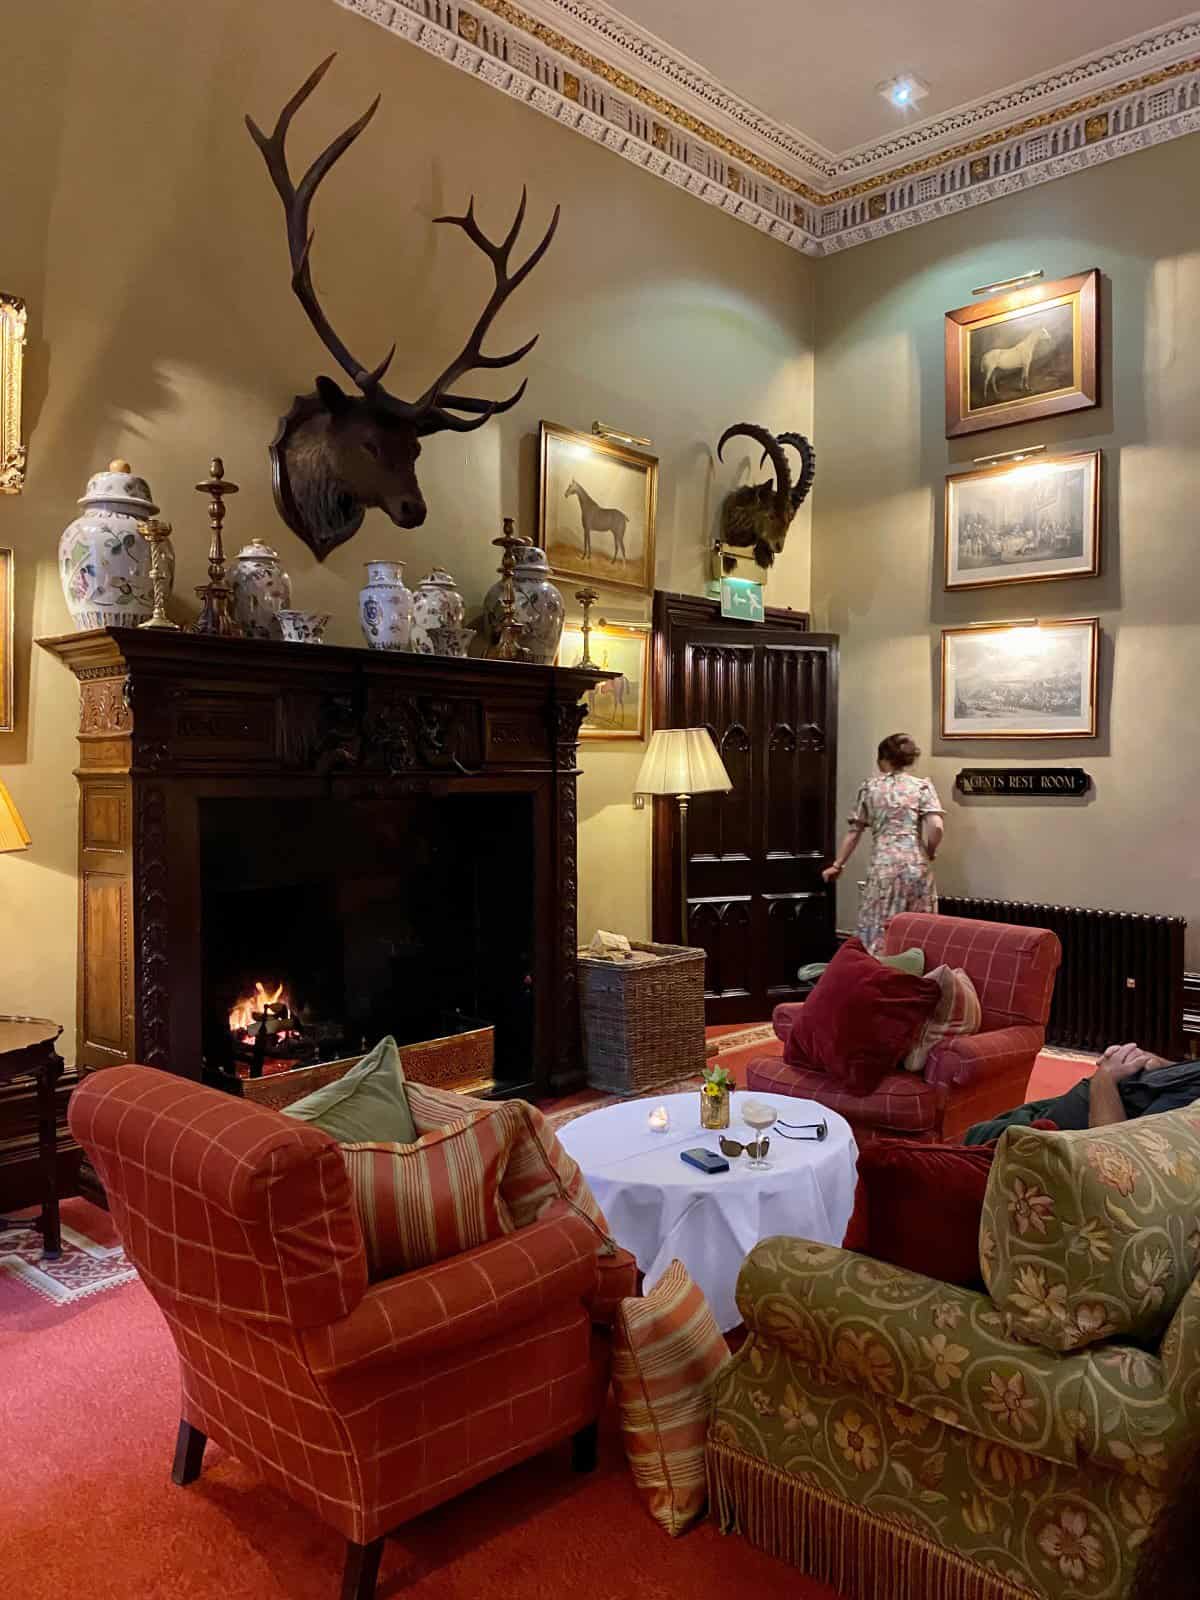 Stay in an Ireland castle hotel - Dromoland Castle offers multiple dining options